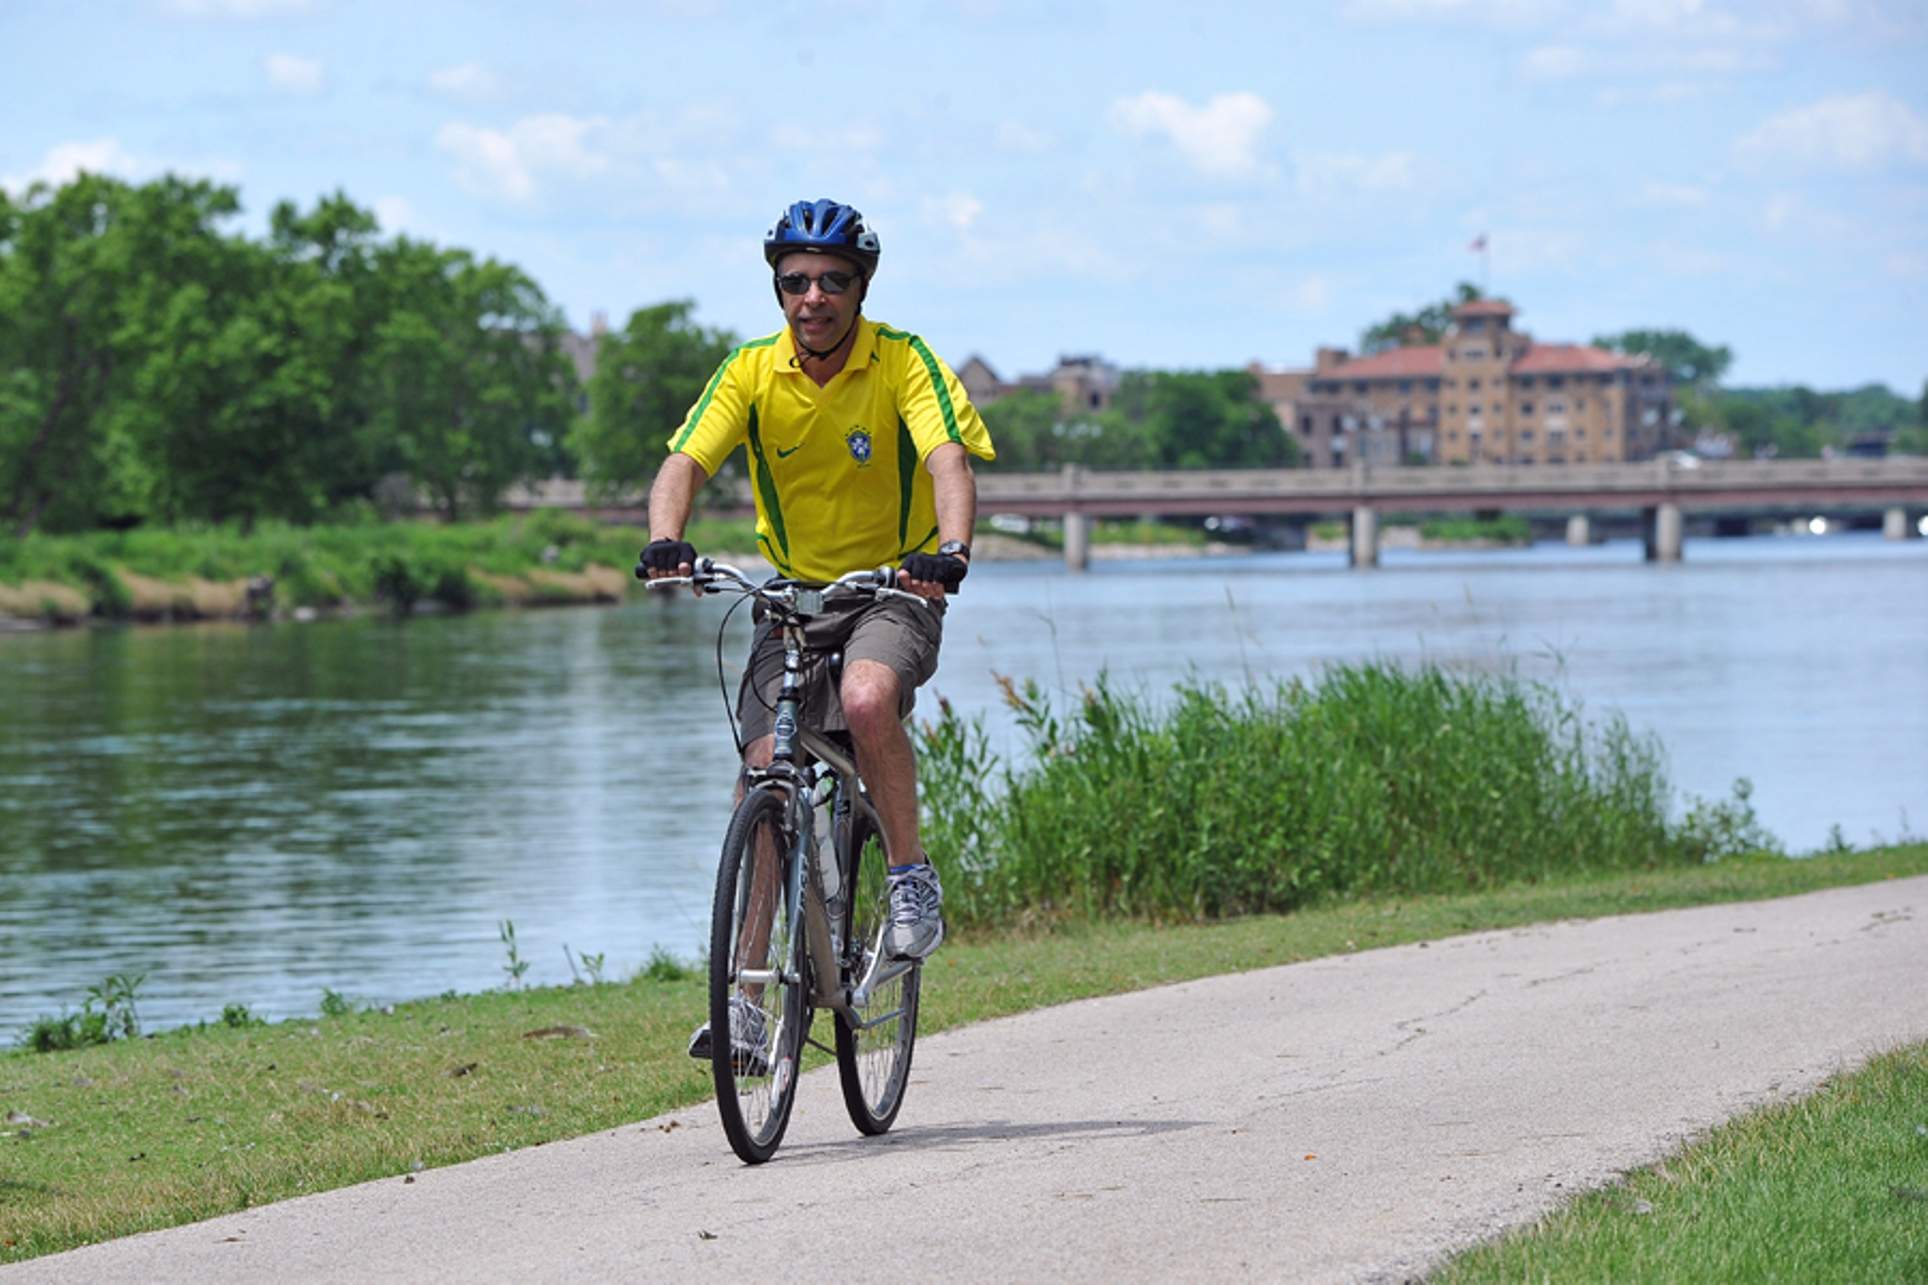 A man in a bright yellow shirt cycling on a path next to the Fox River